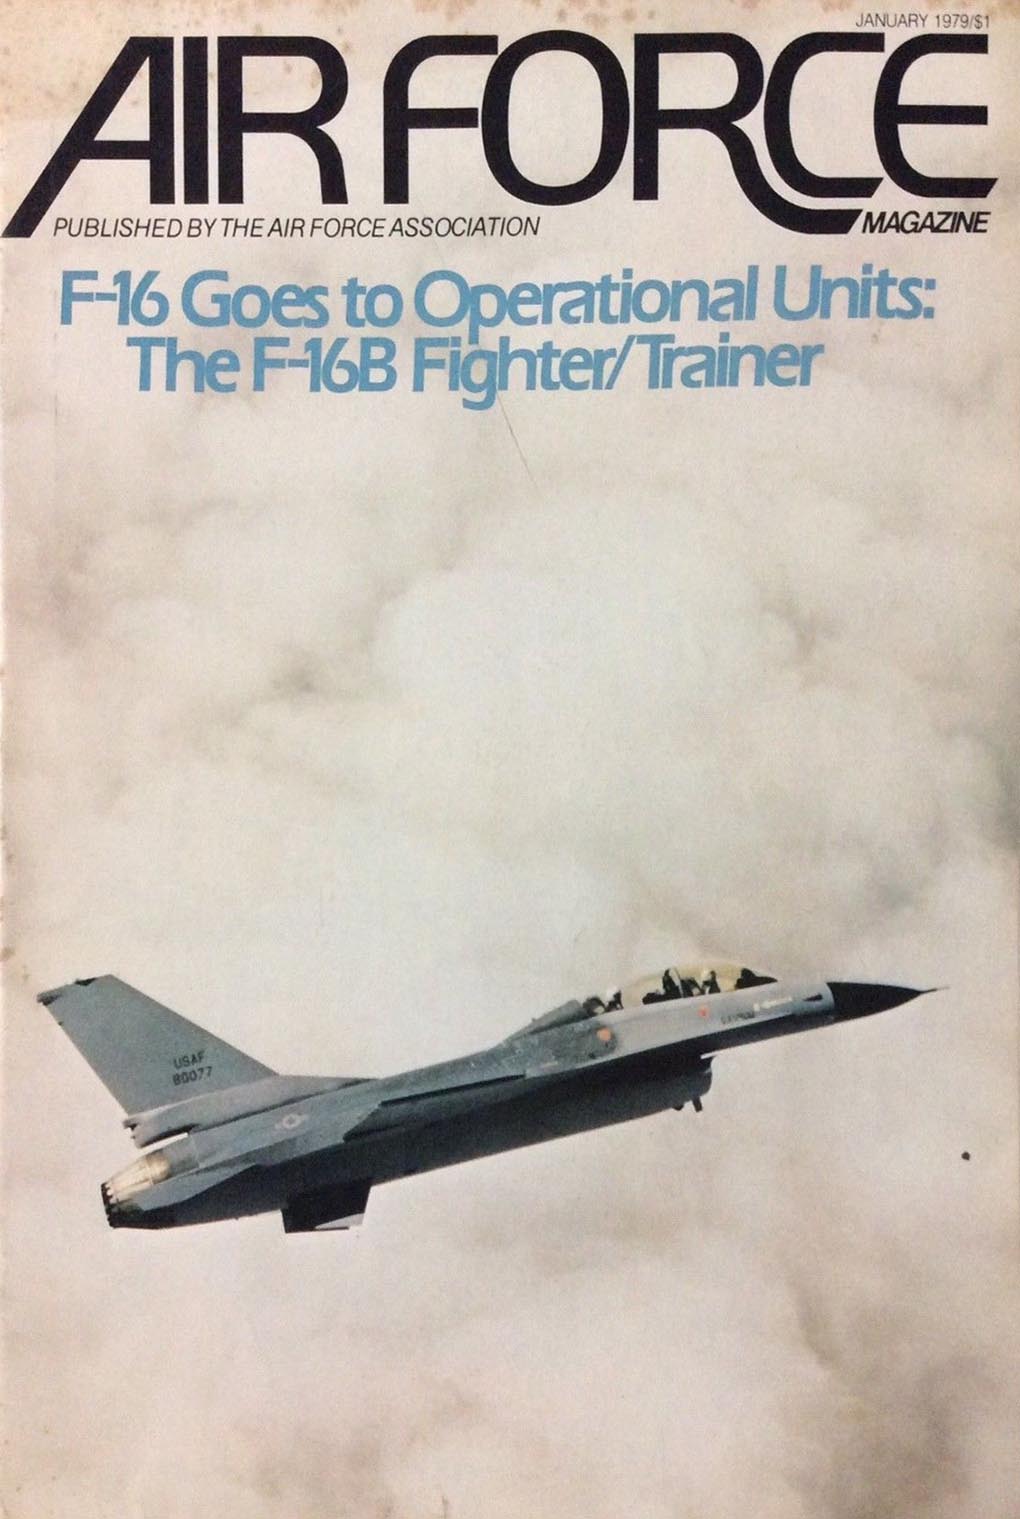 Air Force January 1979 magazine back issue Air Force magizine back copy 